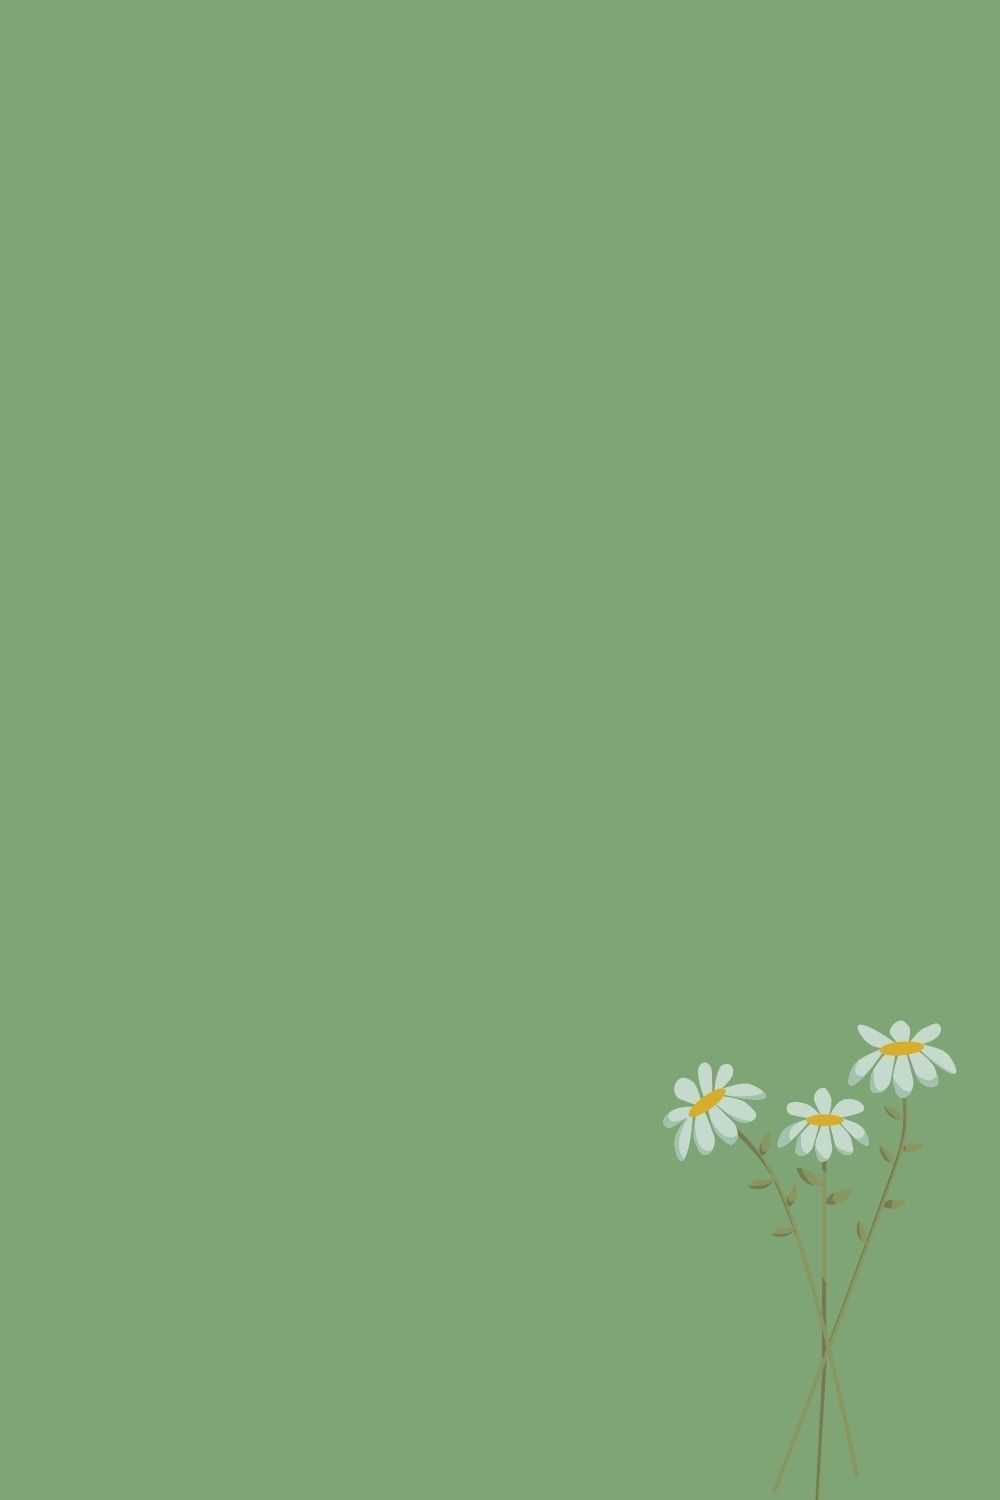 Free download 20 Cute Spring Wallpaper for Phone iPhone Olive Green Sage  700x1257 for your Desktop Mobile  Tablet  Explore 38 Cute Spring  Wallpapers  Wallpaper Spring Cute Spring Backgrounds Spring Backgrounds